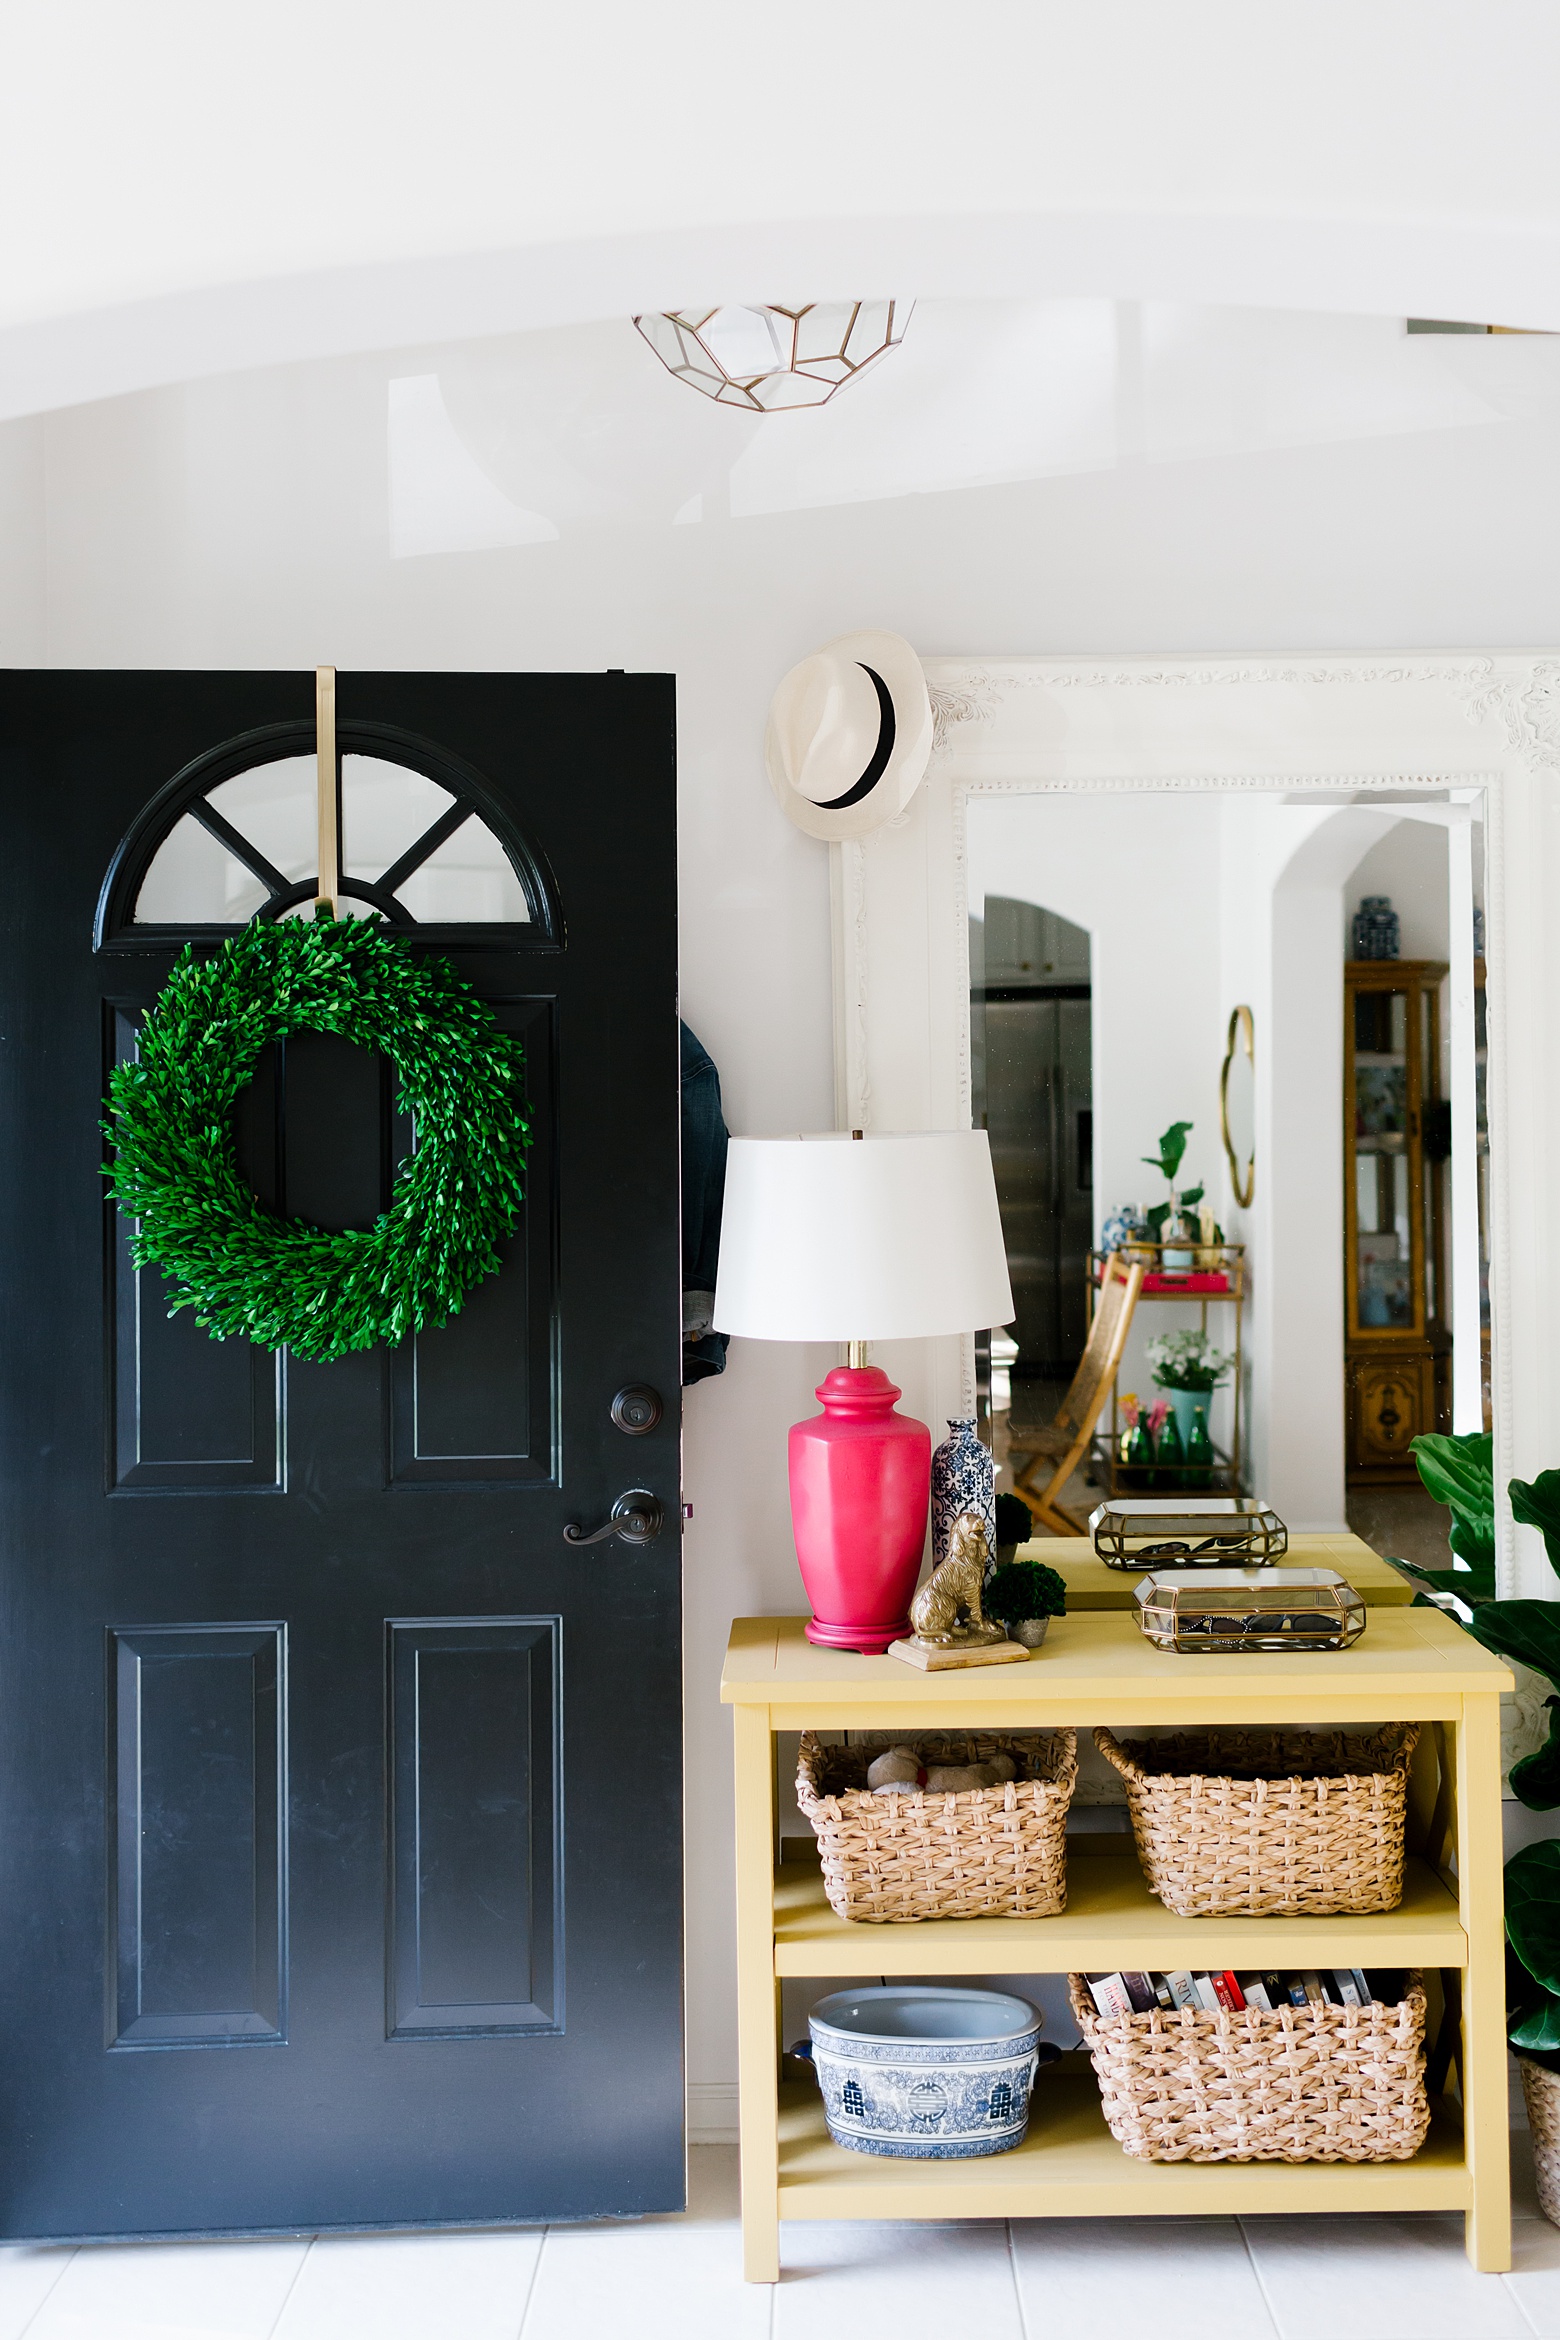 A colorful entryway for this bright home, boxwood wreath, white walls, faceted glass and brass pendant light, modern home decor, colorful home design on Megan Martin Creative